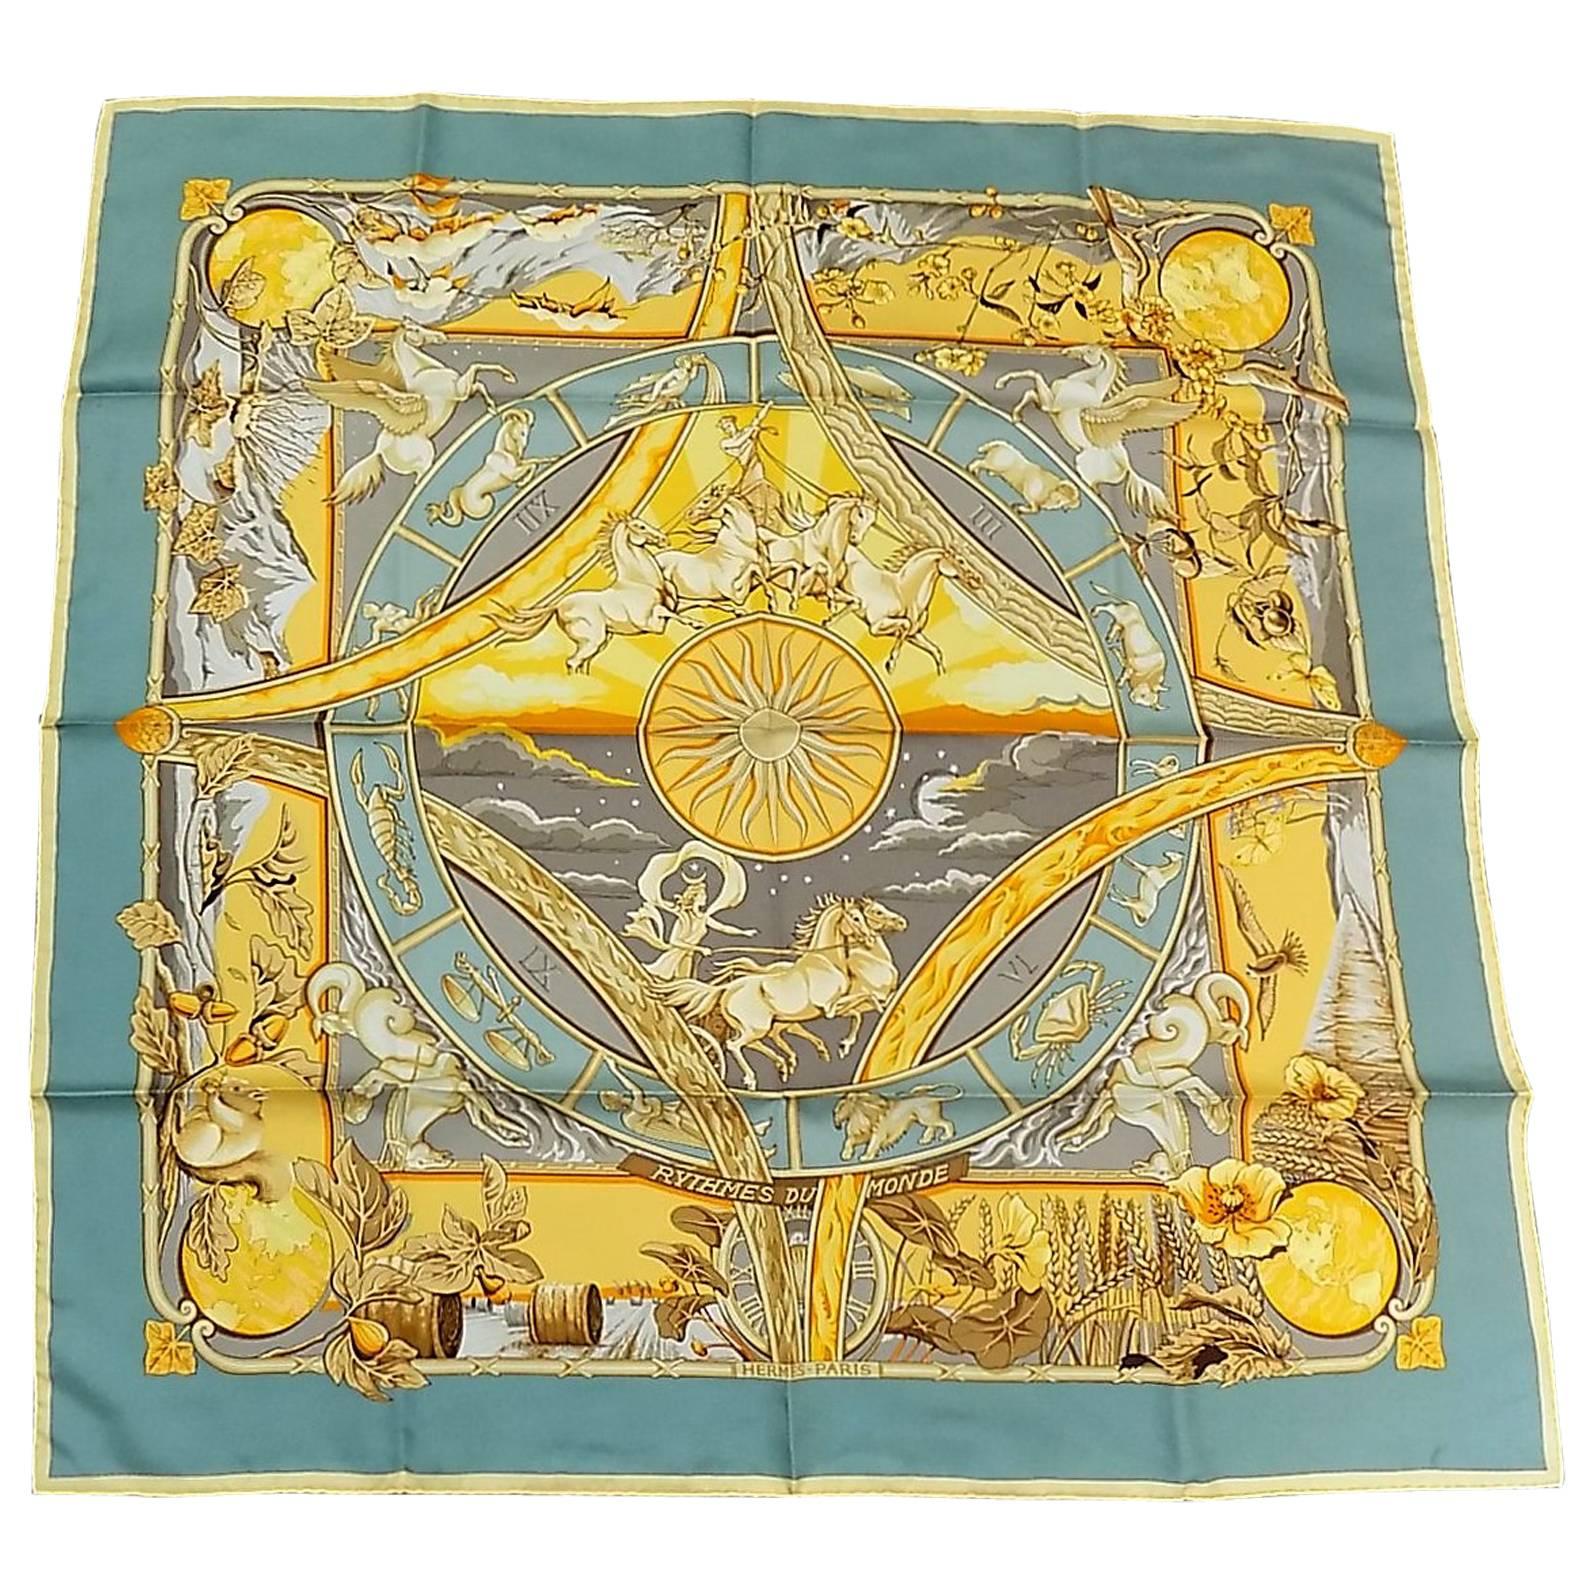 HERMES  Scarf Rythmes du Monde by Laurence Bourthoumieux. 